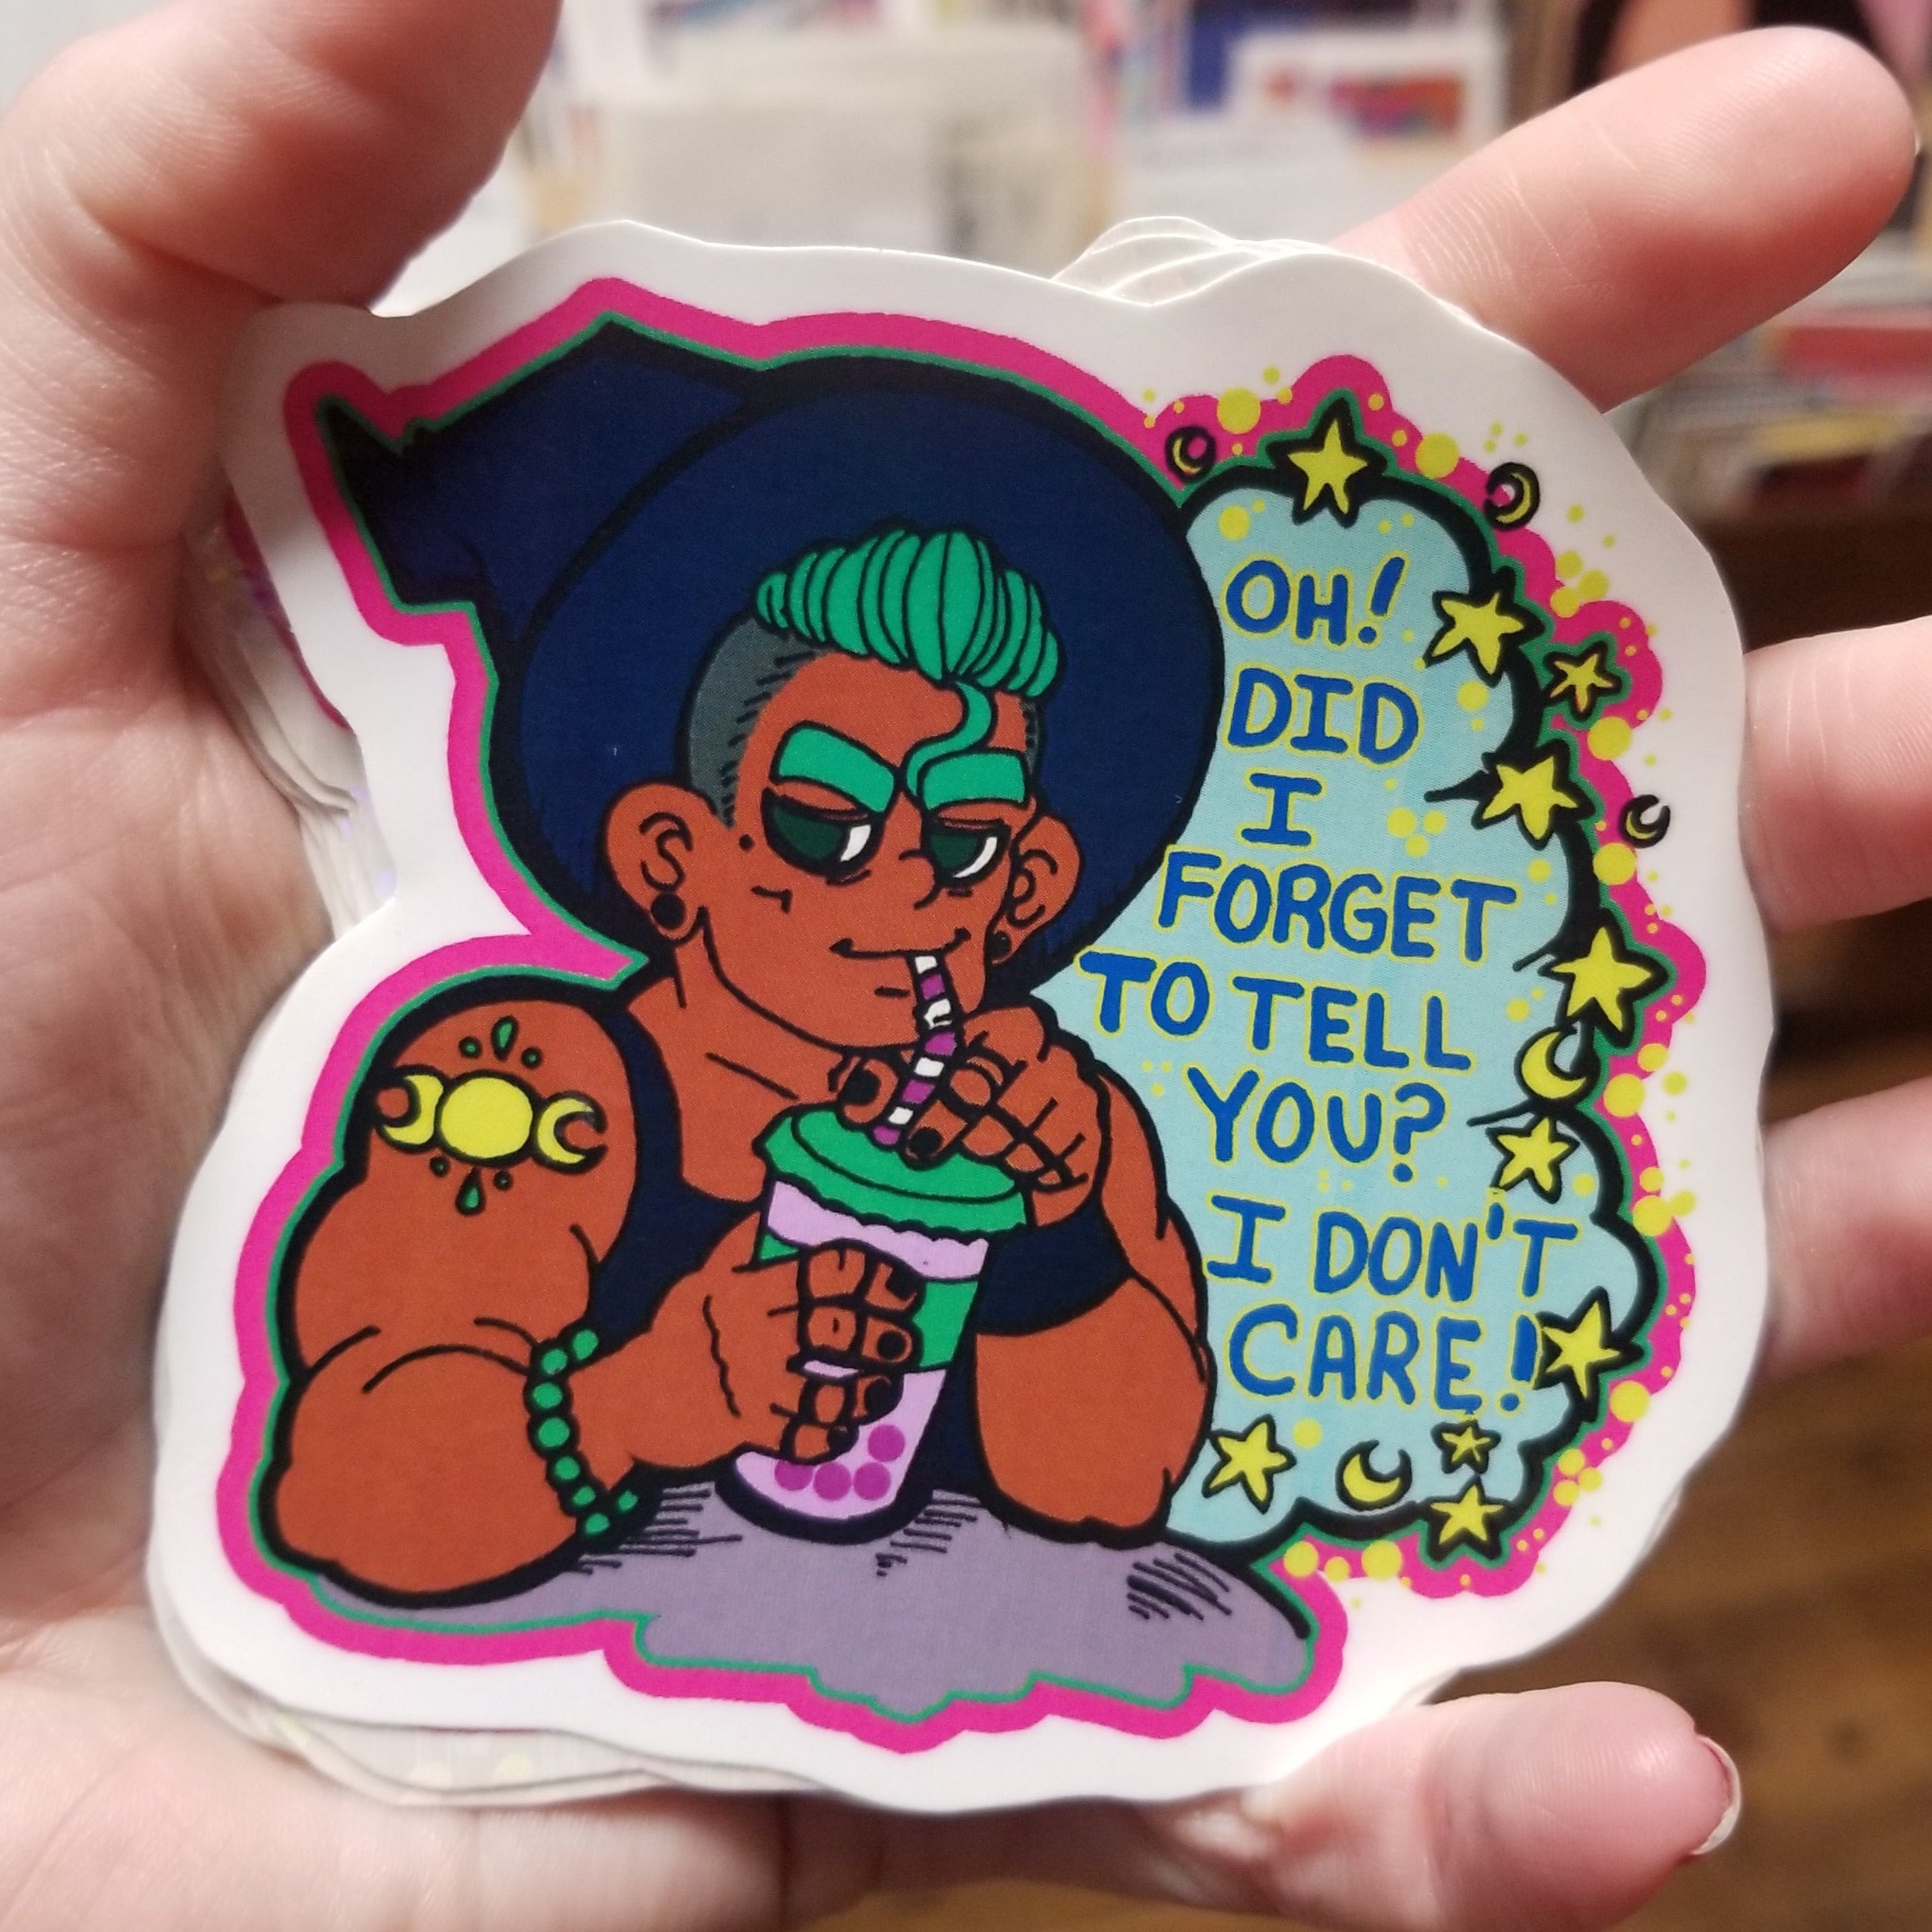 Oh! Did I Forget To Tell You? STICKER by Riot NJ